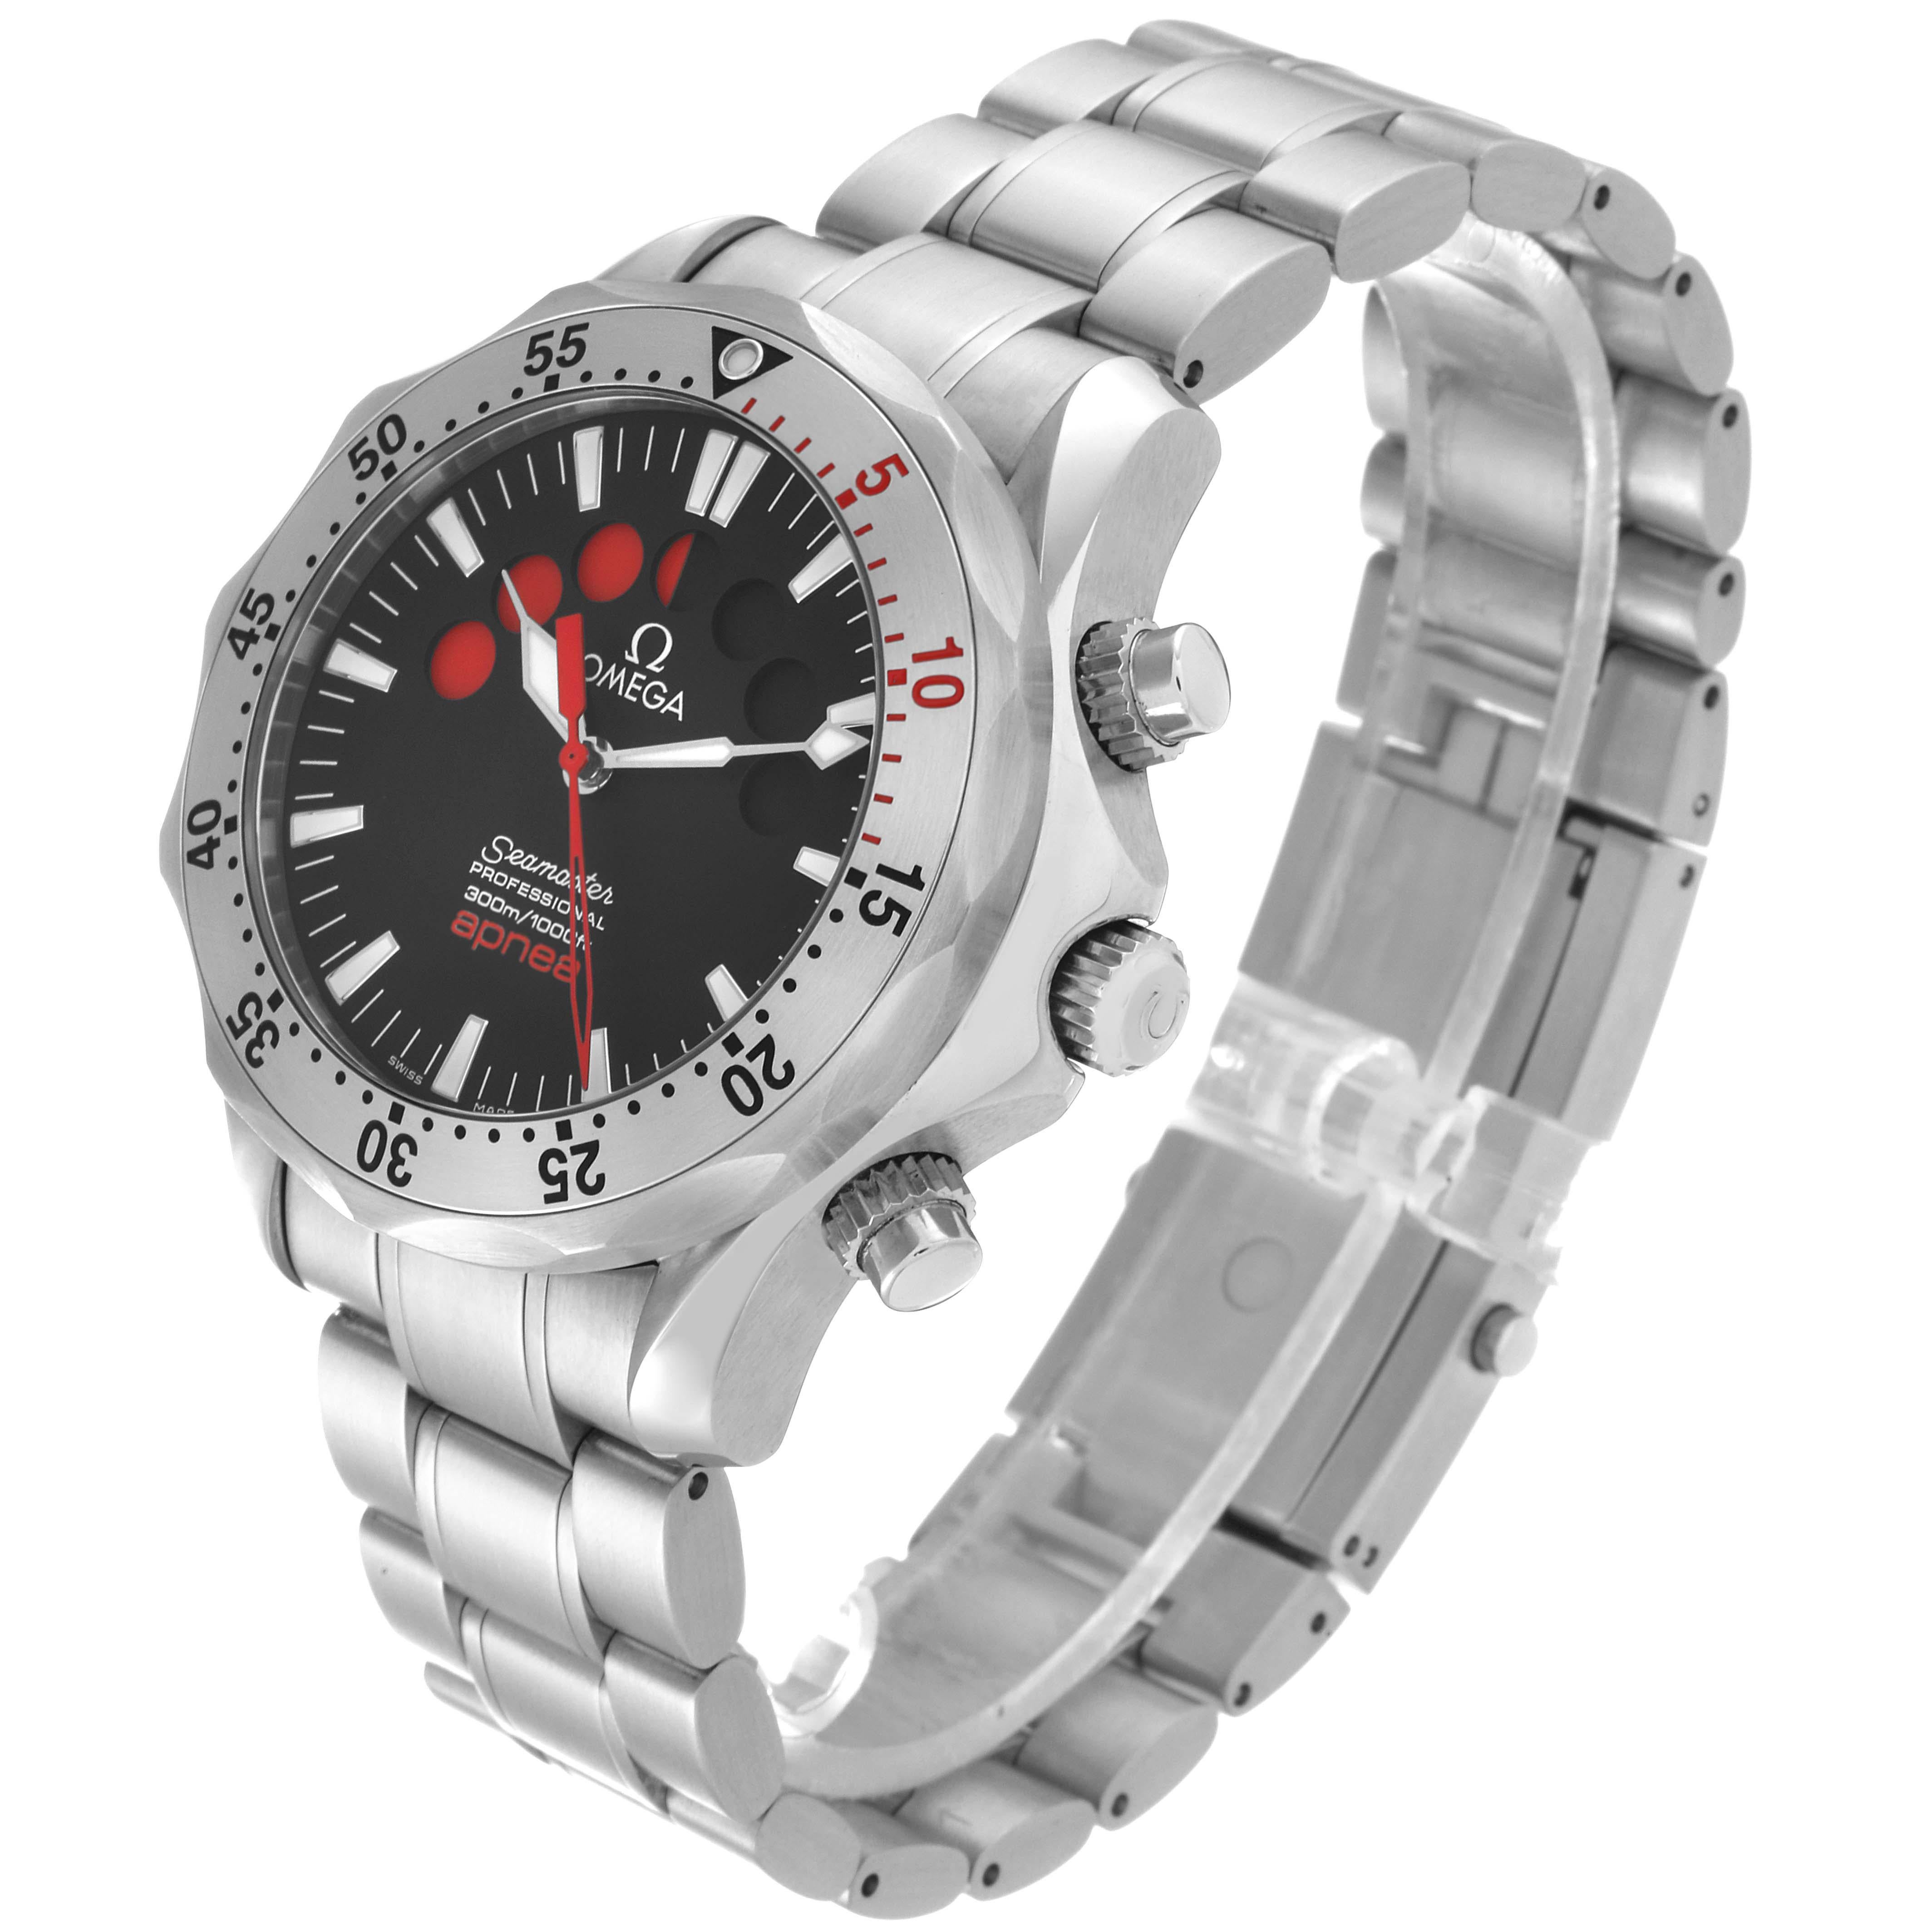 Omega Seamaster Apnea Jacques Mayol Steel Mens Watch 2595.50.00 Box Card For Sale 2